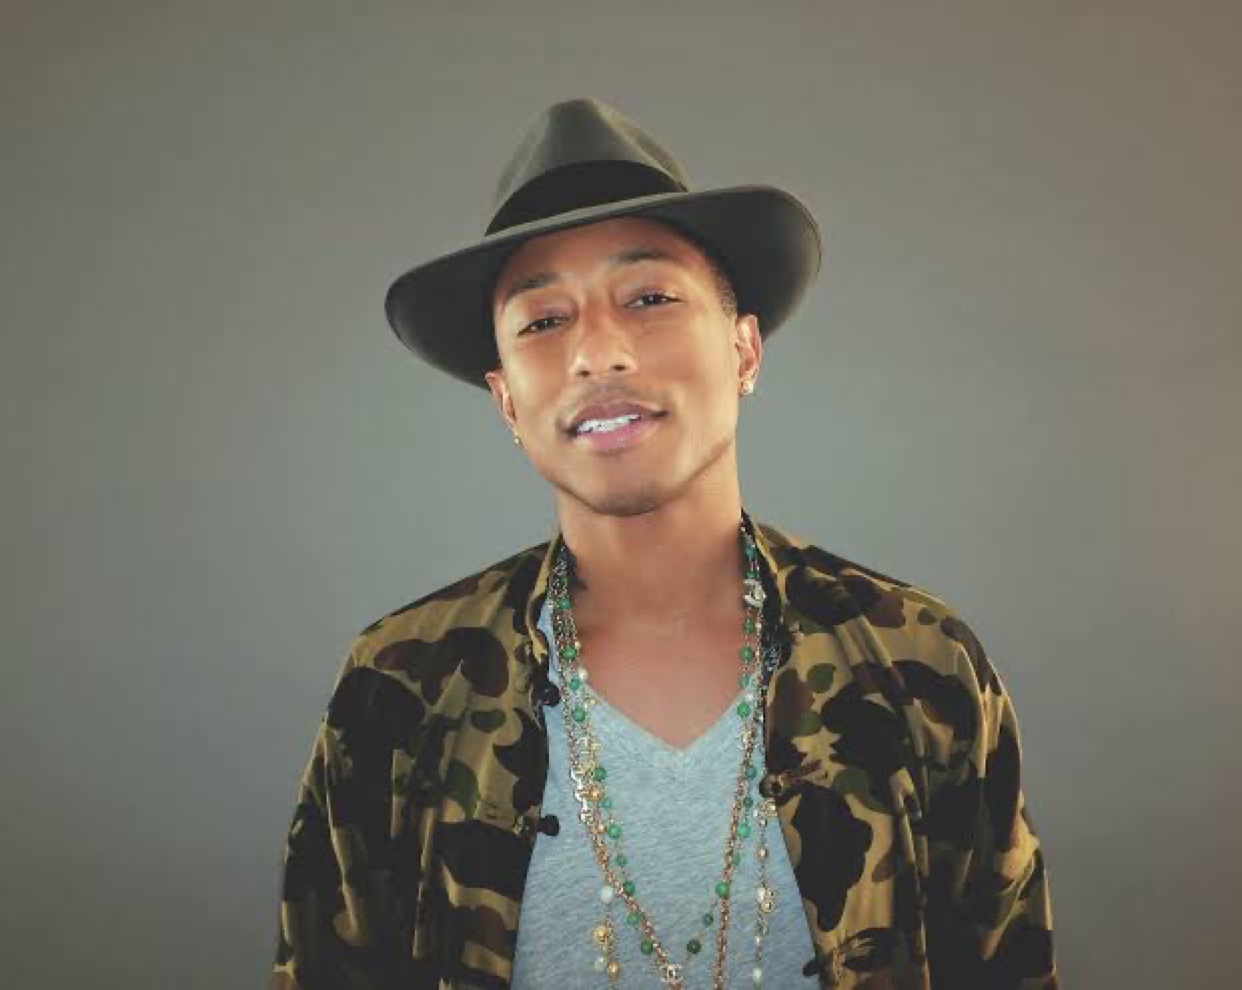 Pharrell Williams Shares Tips On How To Stay Young And Have Amazing Skin As  An Adult